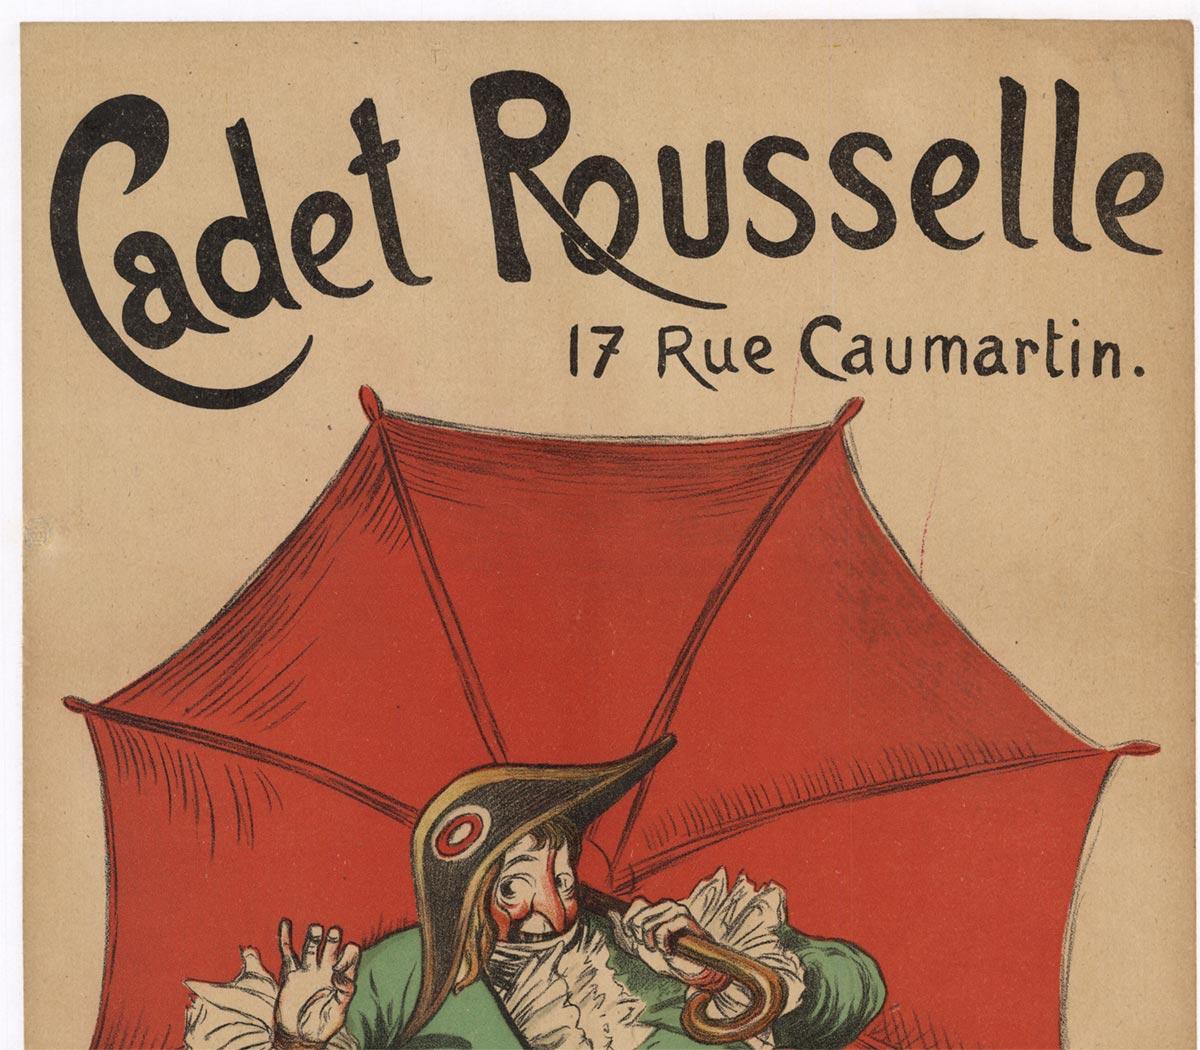 Original Cadet Rousselle vintage 1916 French vintage poster - Print by Leonetto Cappiello